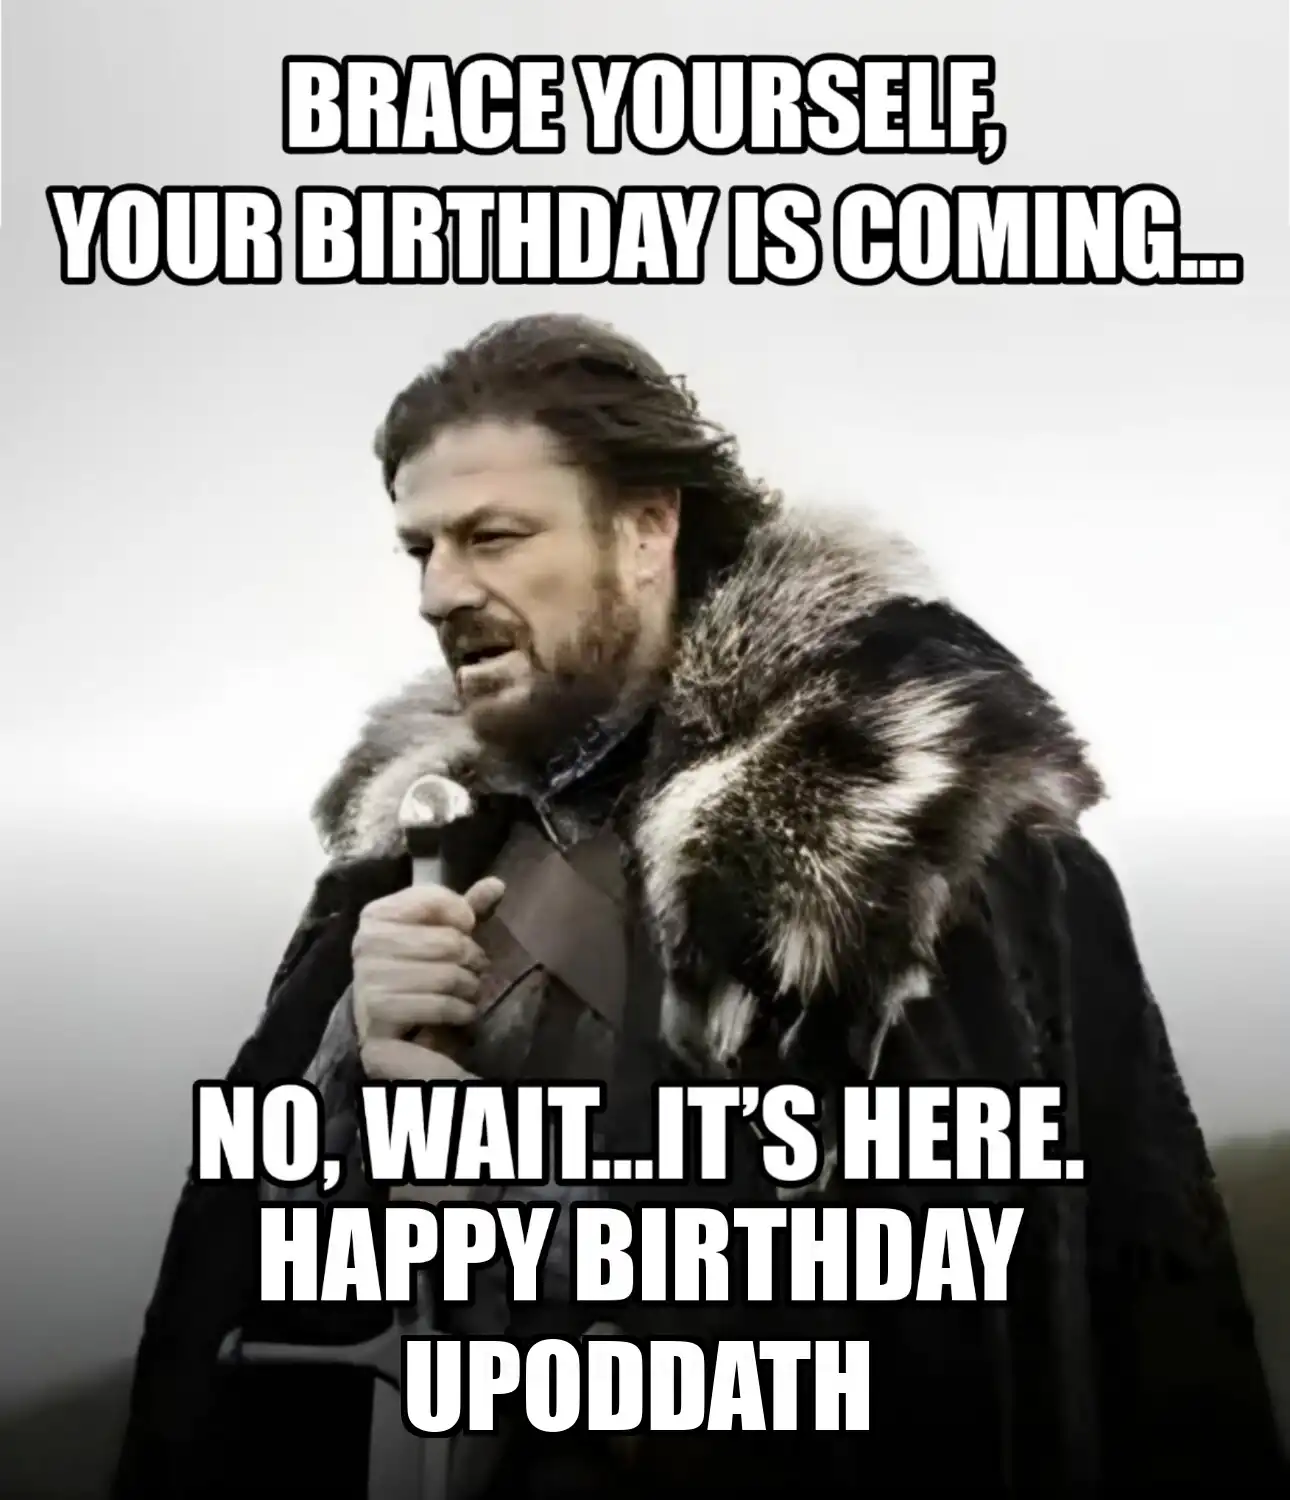 Happy Birthday Upoddath Brace Yourself Your Birthday Is Coming Meme